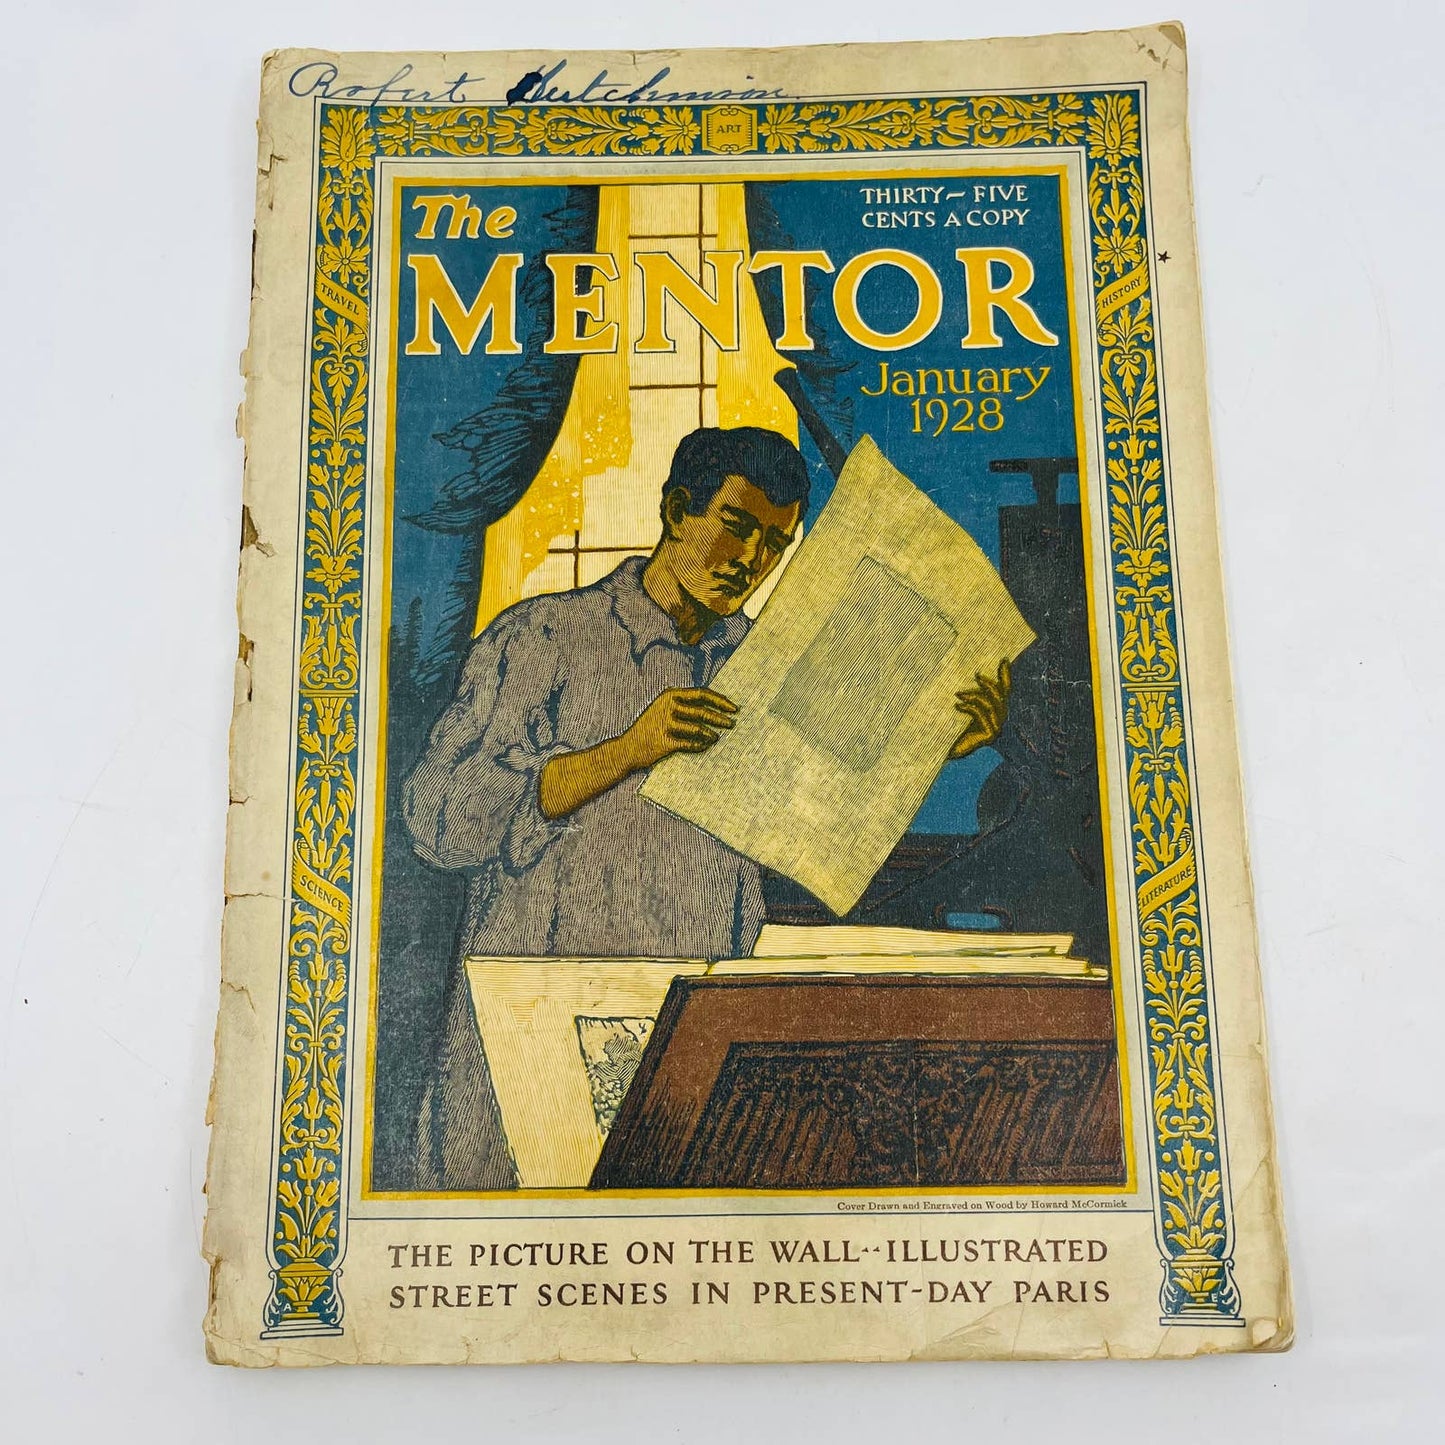 VTG The Mentor Magazine January 1928 The Picture on the Wall Paris Scenes BA4